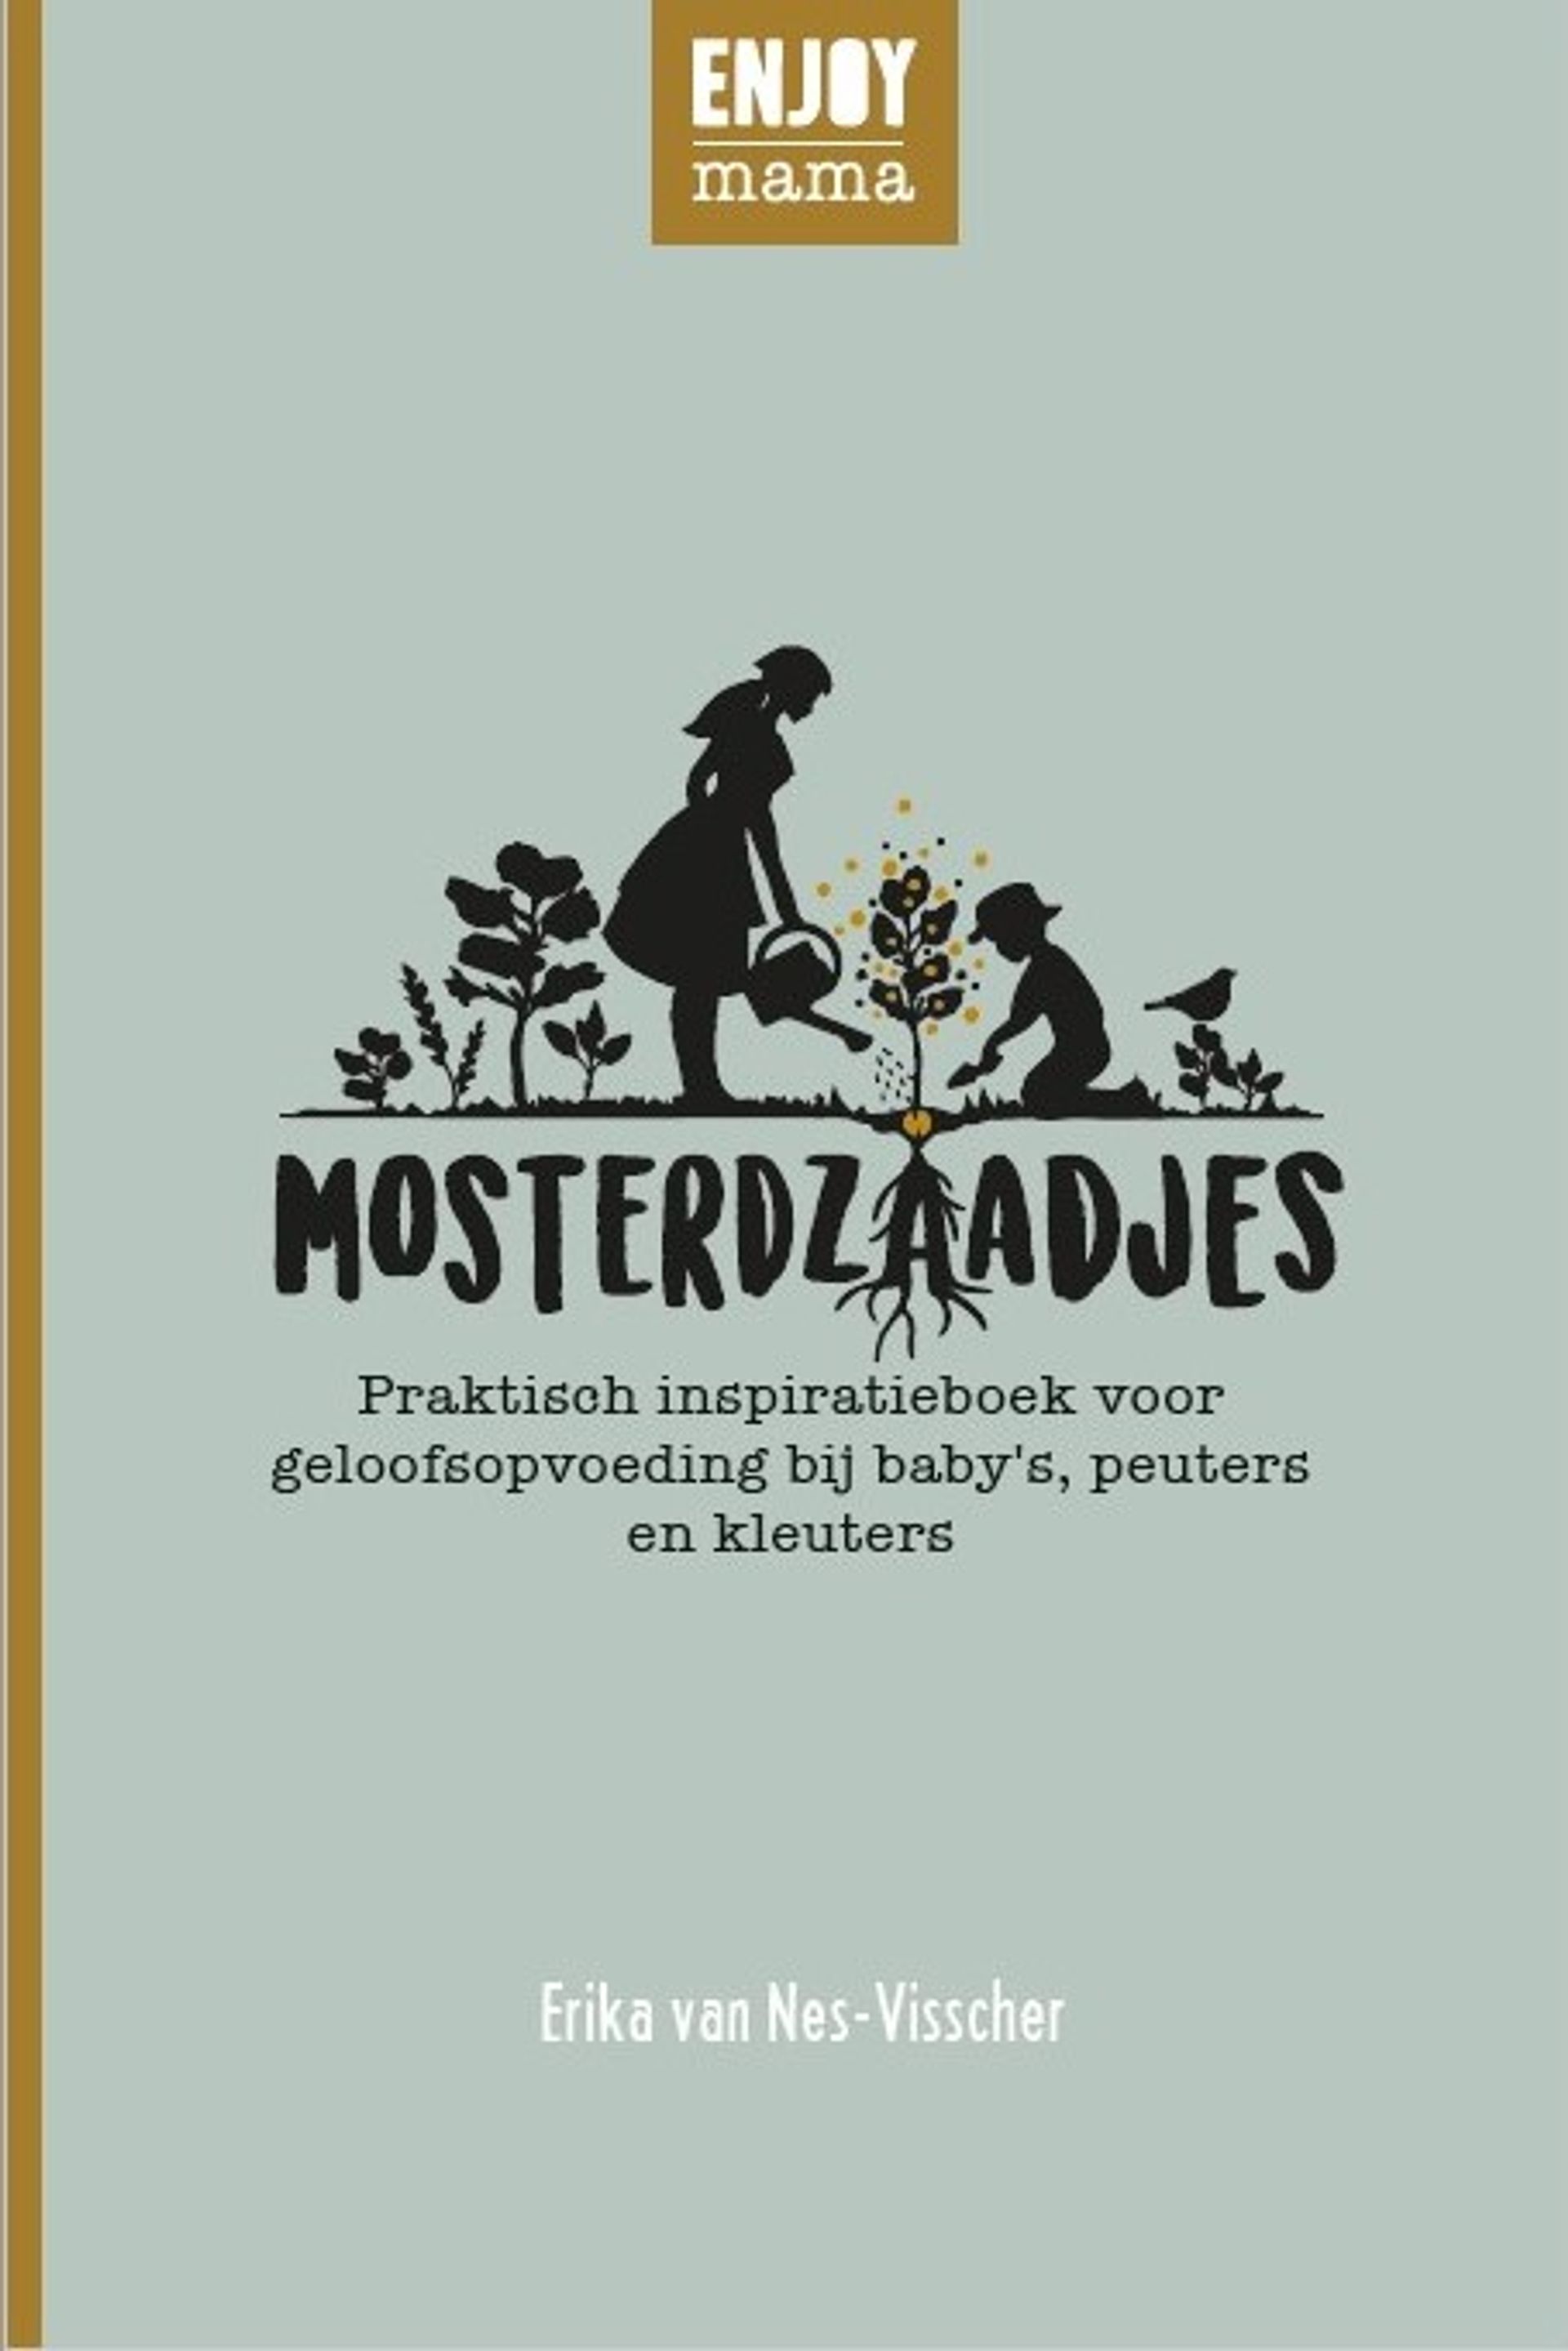 Mosterdzaadjes_cover